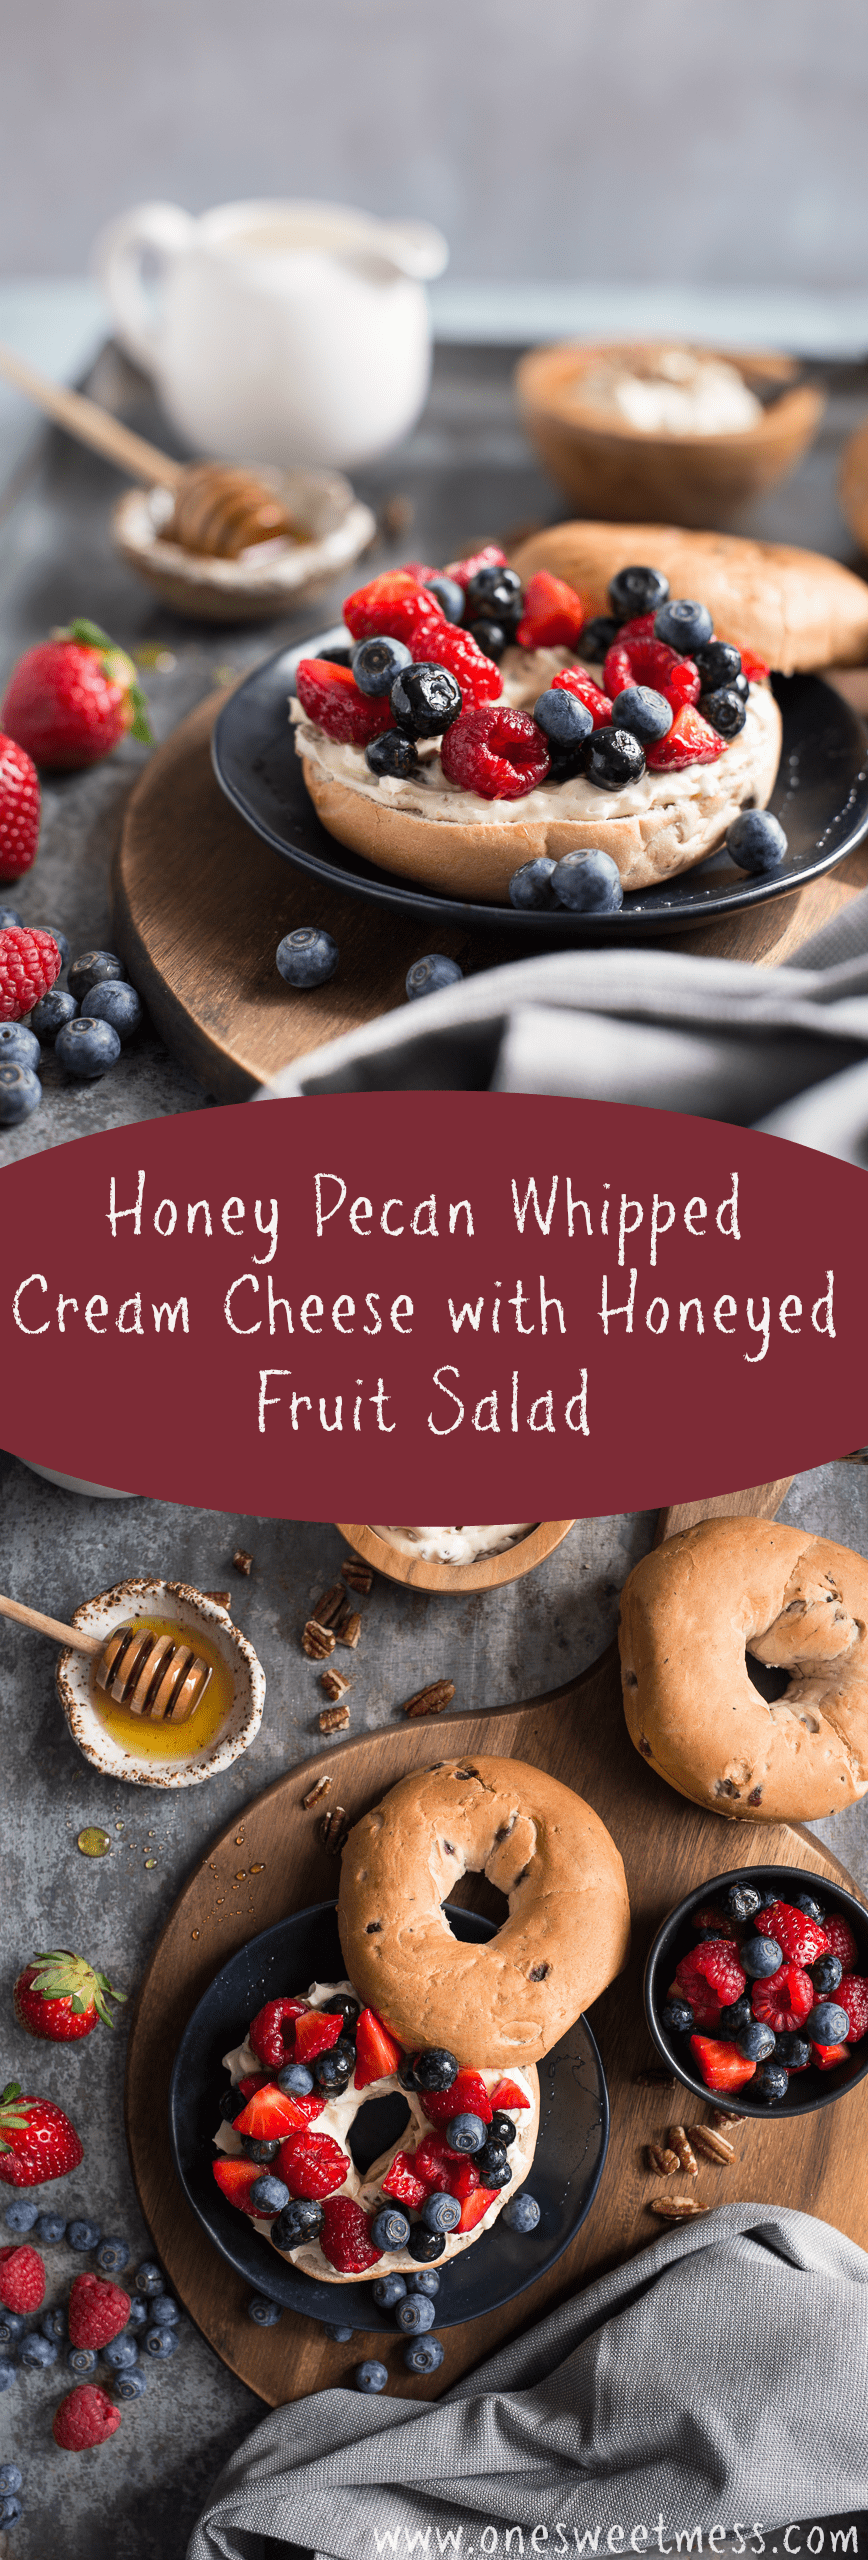 Honey Pecan Whipped Cream Cheese with Honeyed Fruit Salad: The ultimate morning bagel experience!